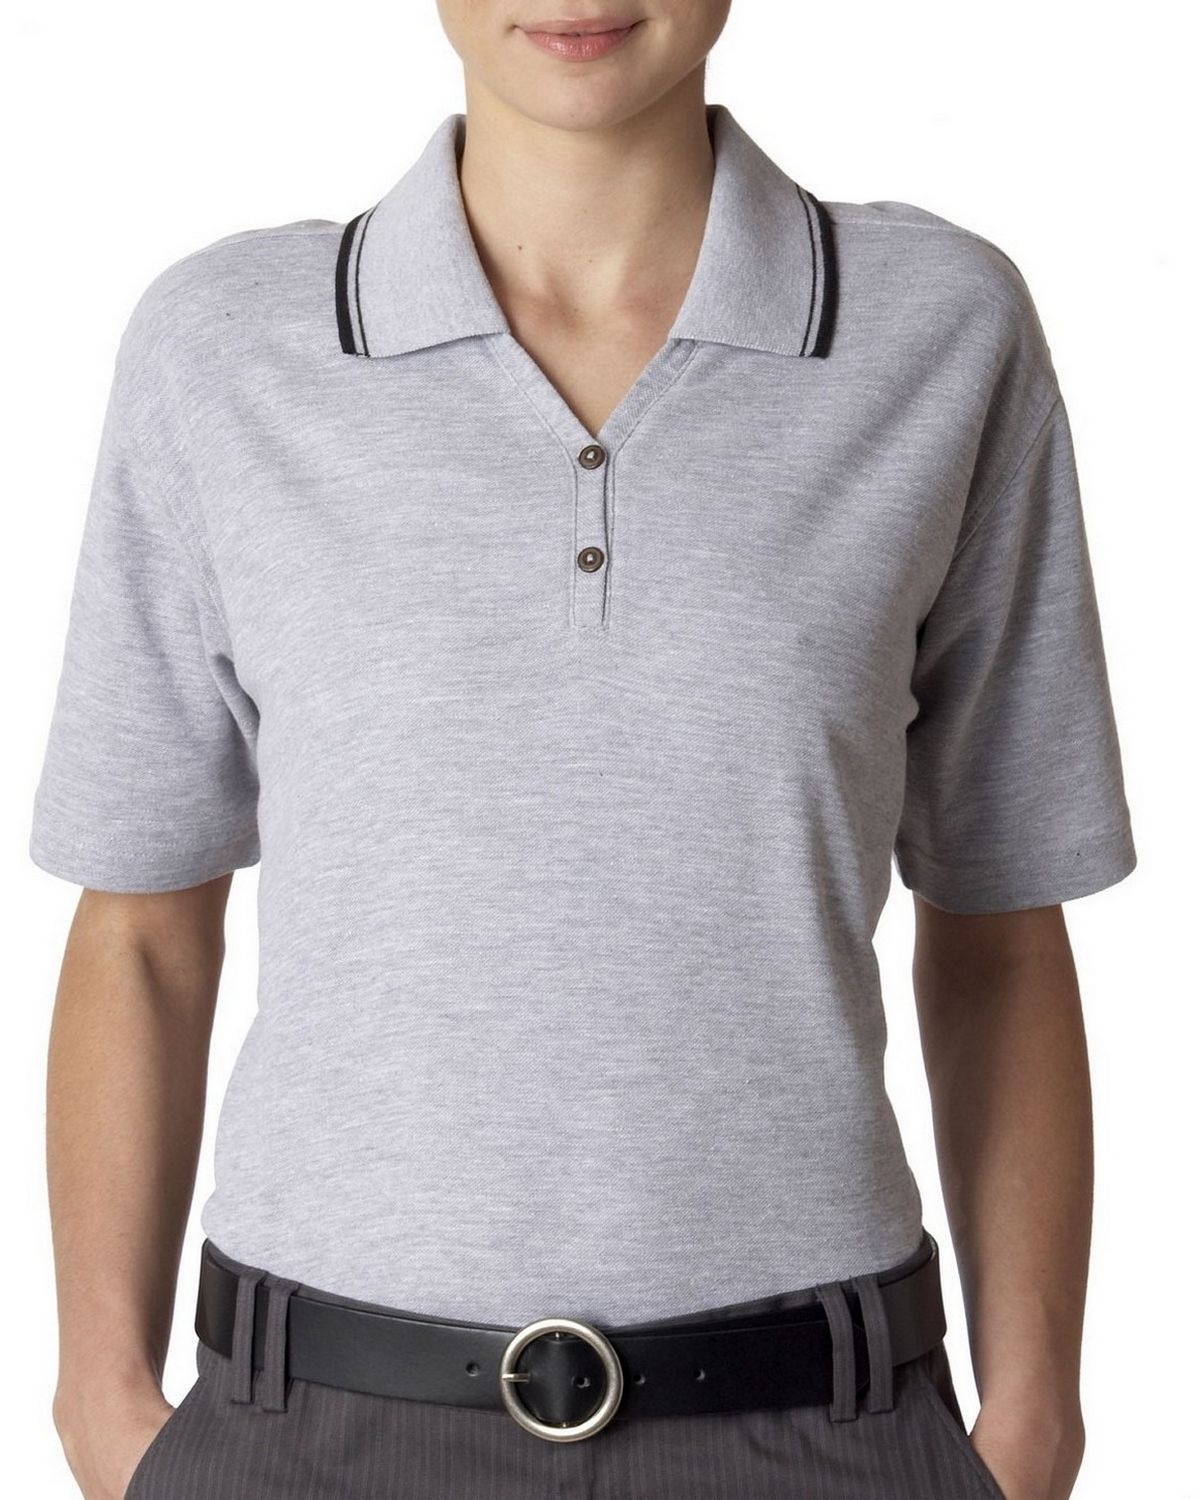 Ultraclub 8546 Women Shortsleeve Whisper Pique Polo With Tipped Collar at Apparelstation